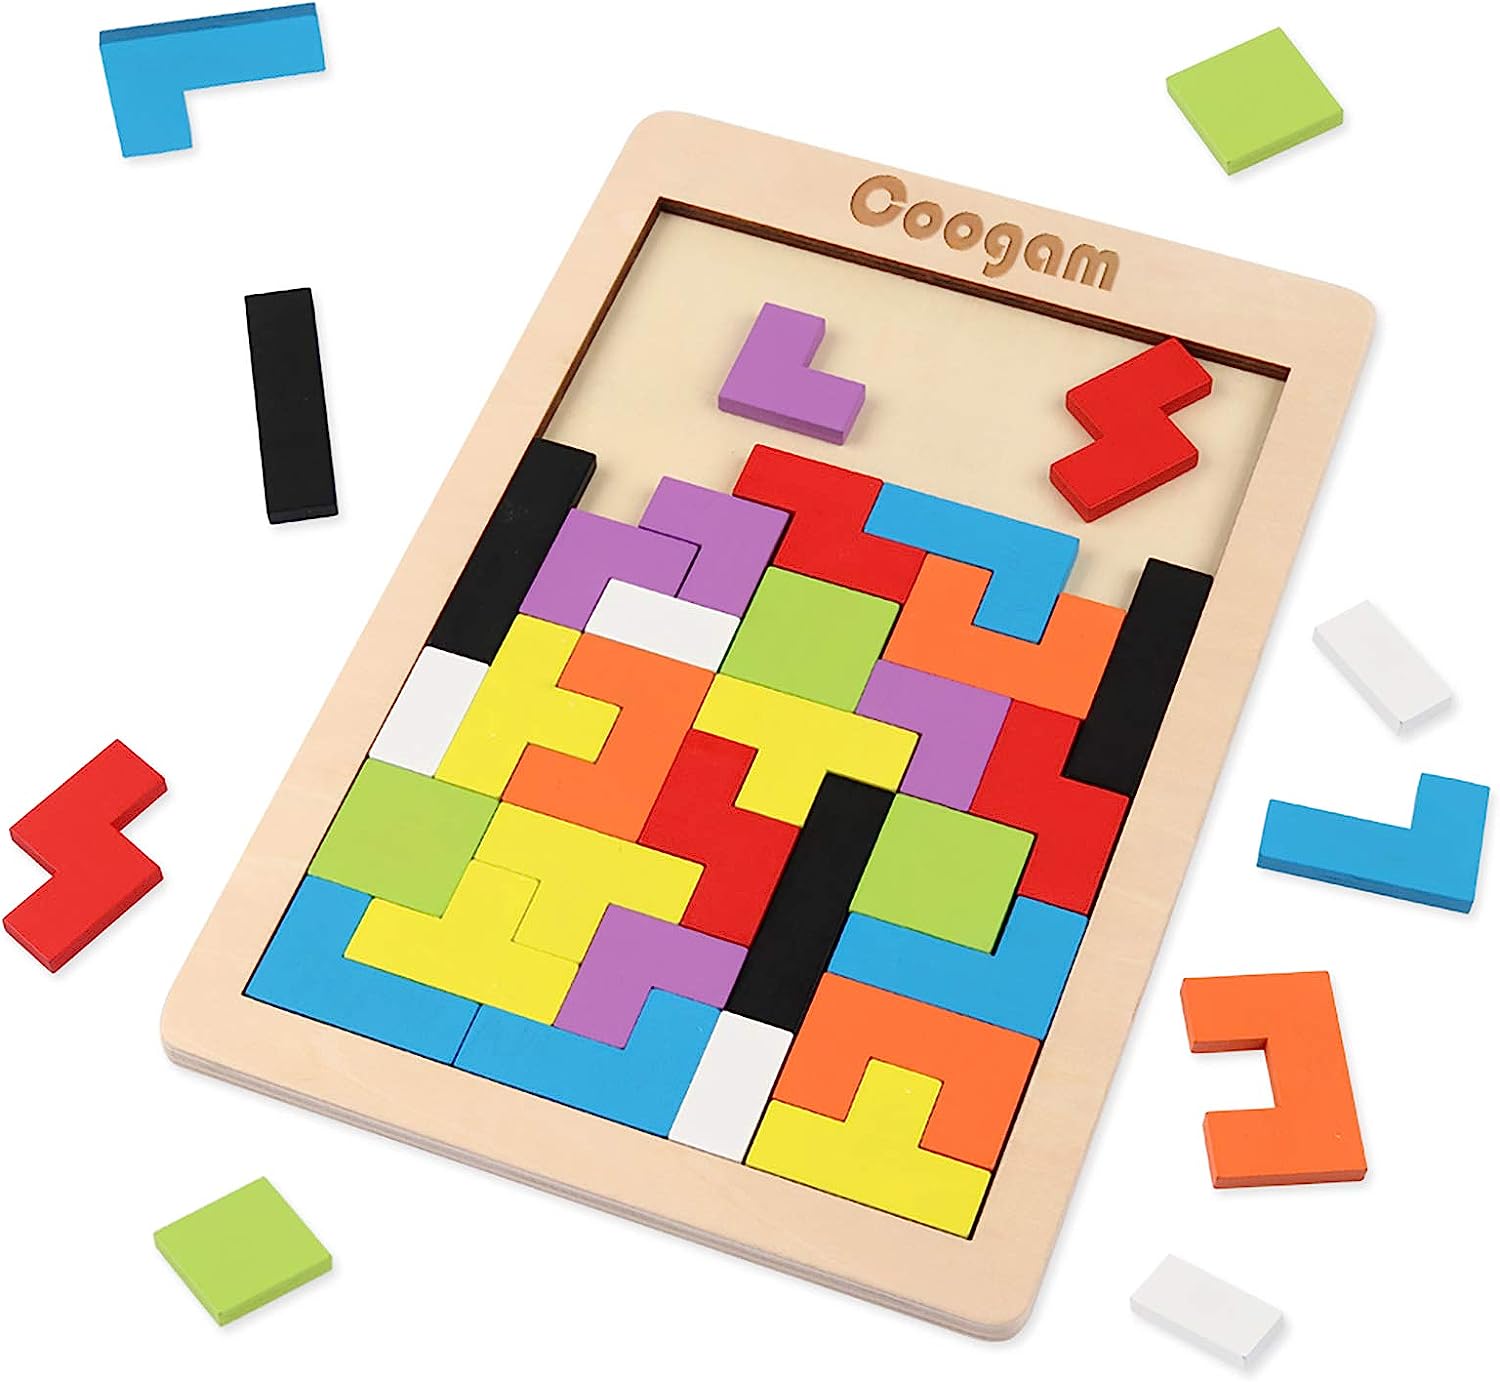 Coogam Wooden Blocks Puzzle Brain Teasers Toy Tangram [...]